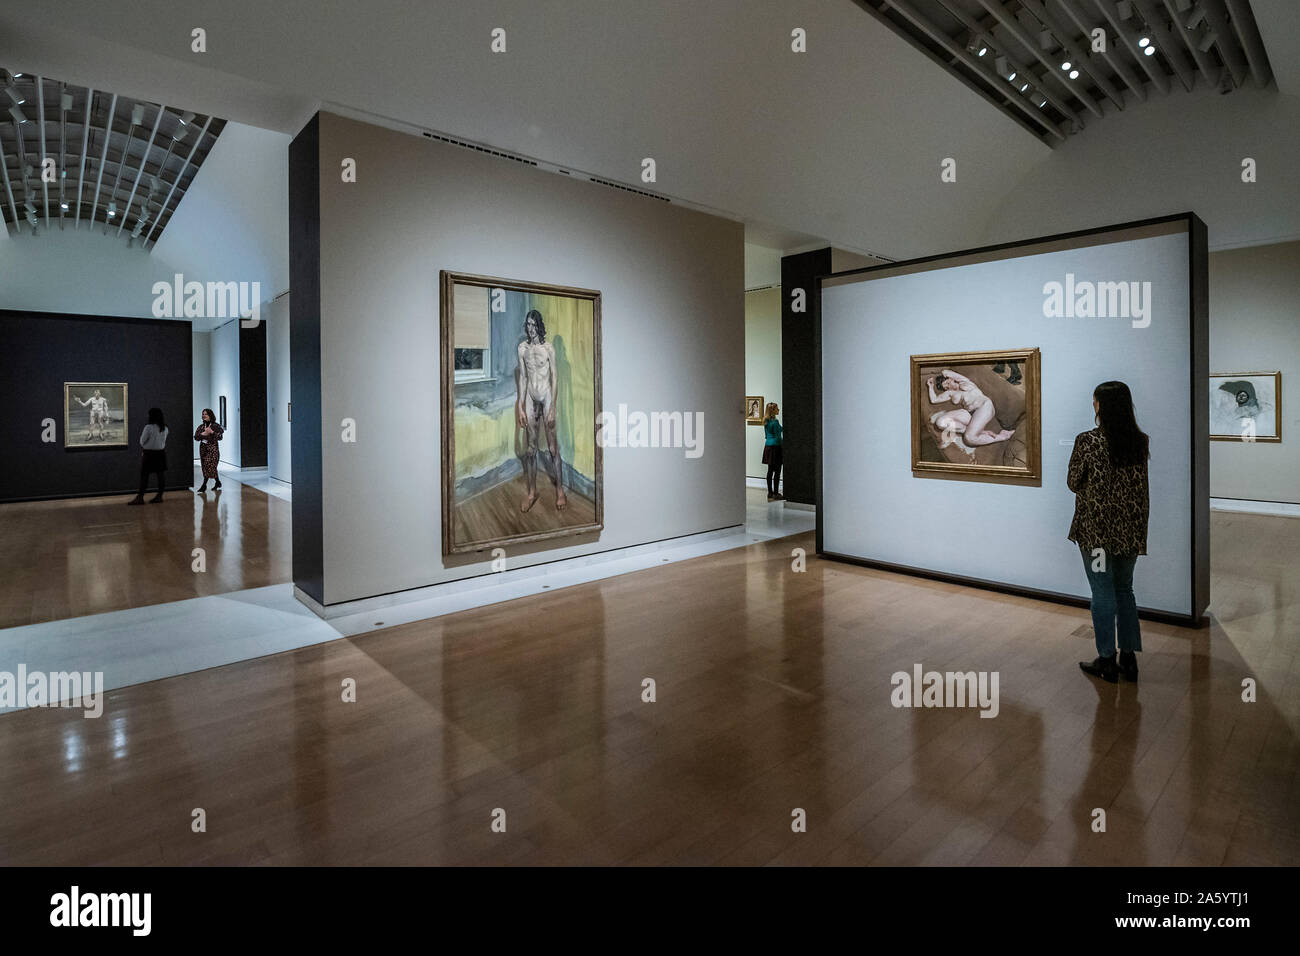 London, UK. 23rd Oct, 2019. Lucian Freud self-portraits at the Royal Academy of Arts. Executed over almost seven decades on canvas and paper, the exhibition brings together 56 works that chart Freud’s artistic development. Credit: Guy Bell/Alamy Live News Stock Photo